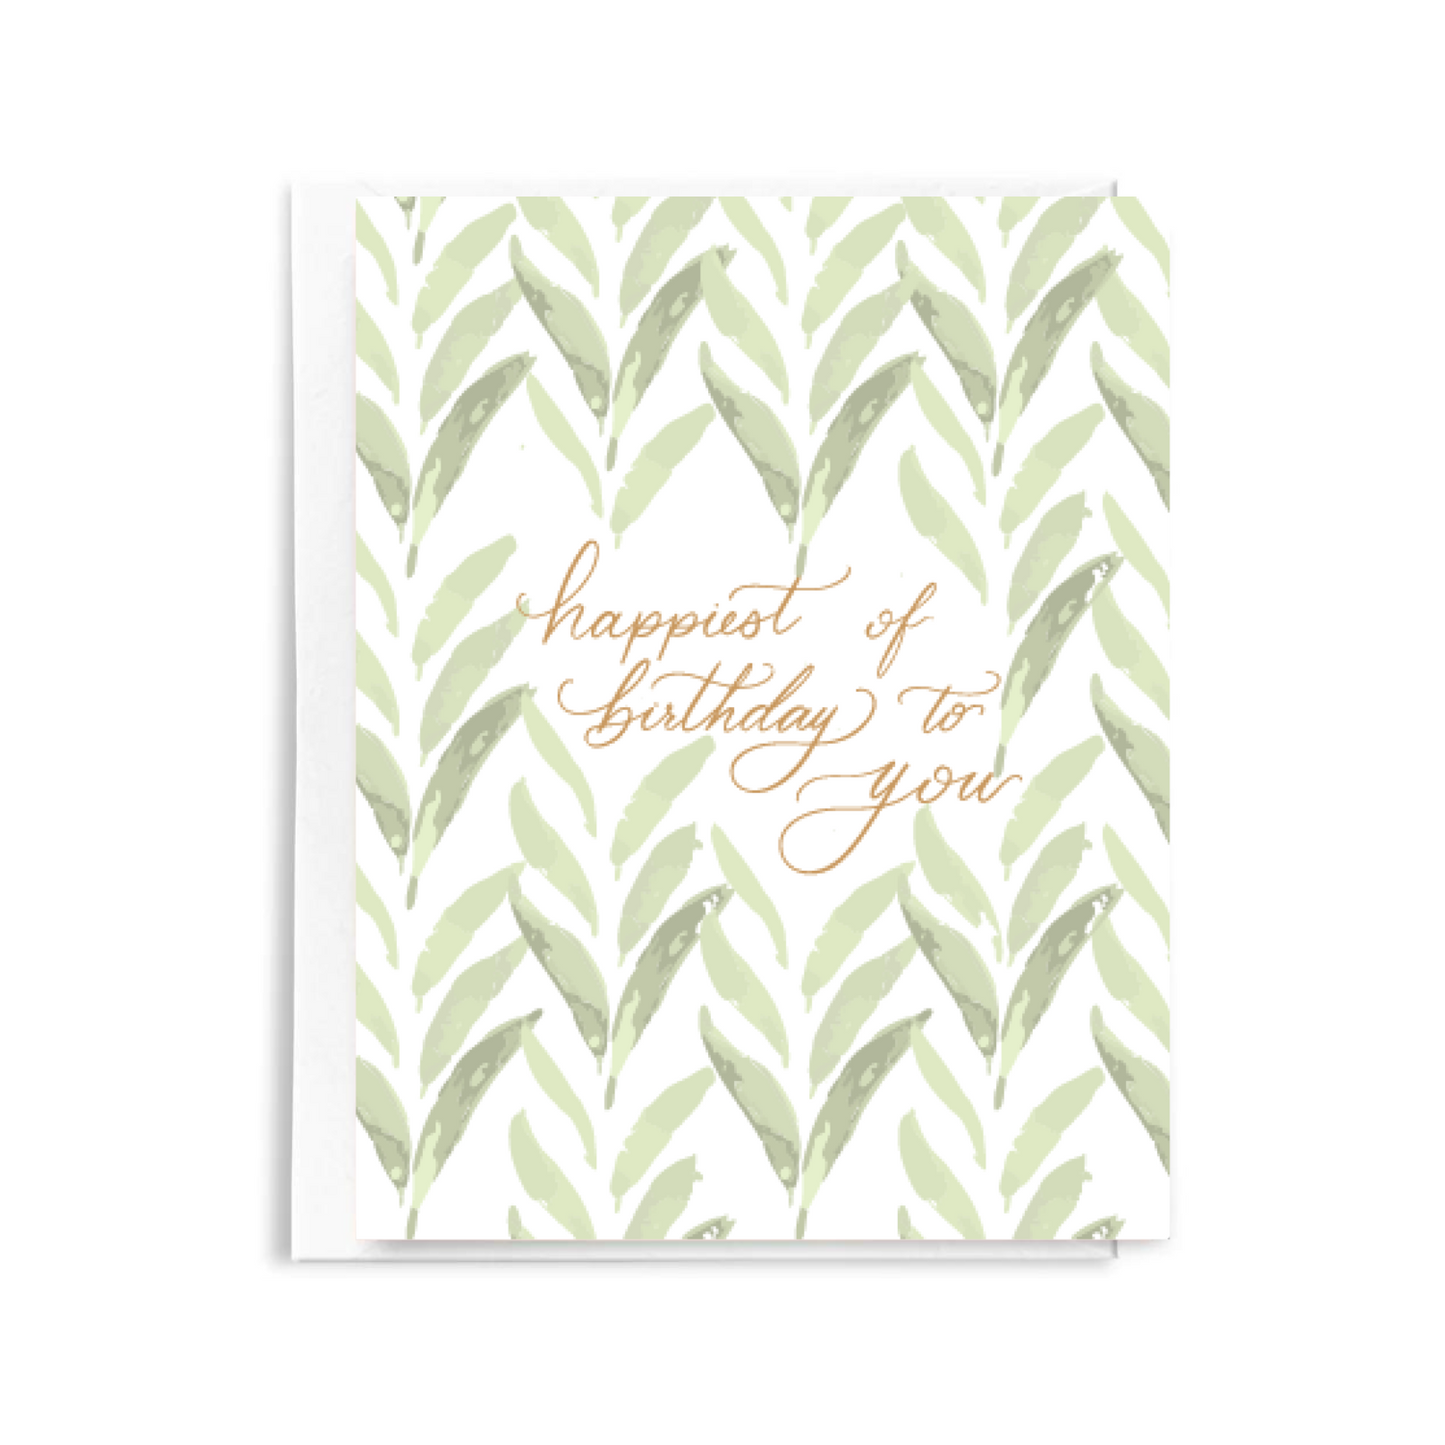 Watercolor Birthday Card - Happiest Birthday to You